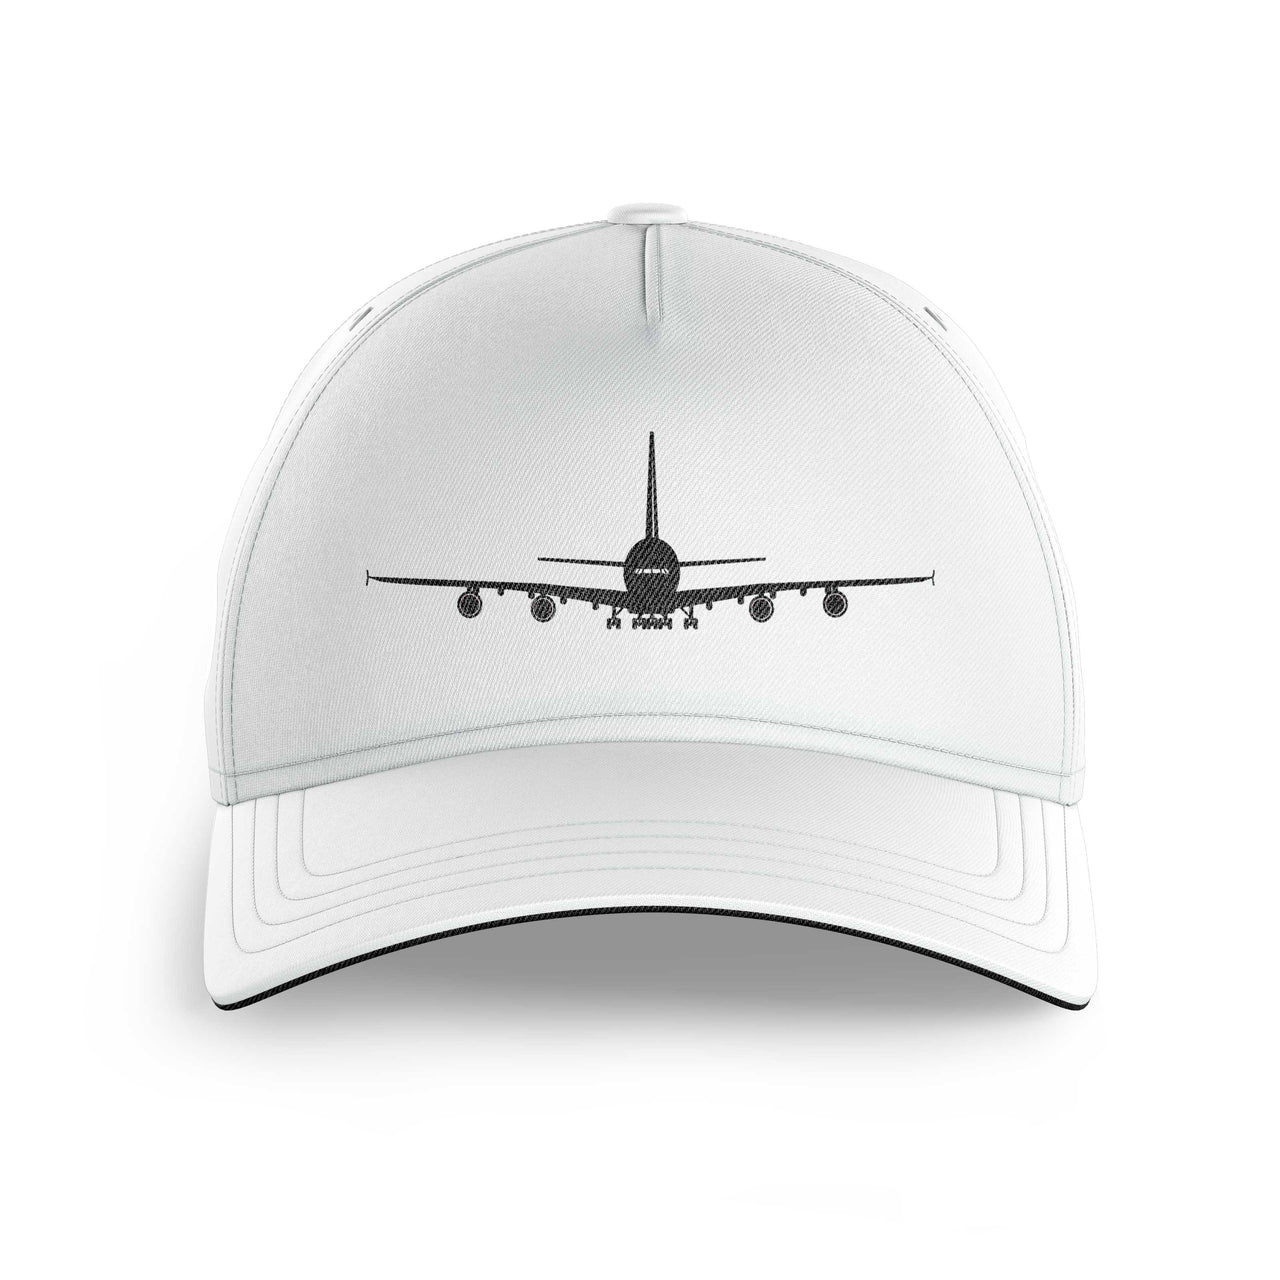 Airbus A380 Silhouette Printed Hats